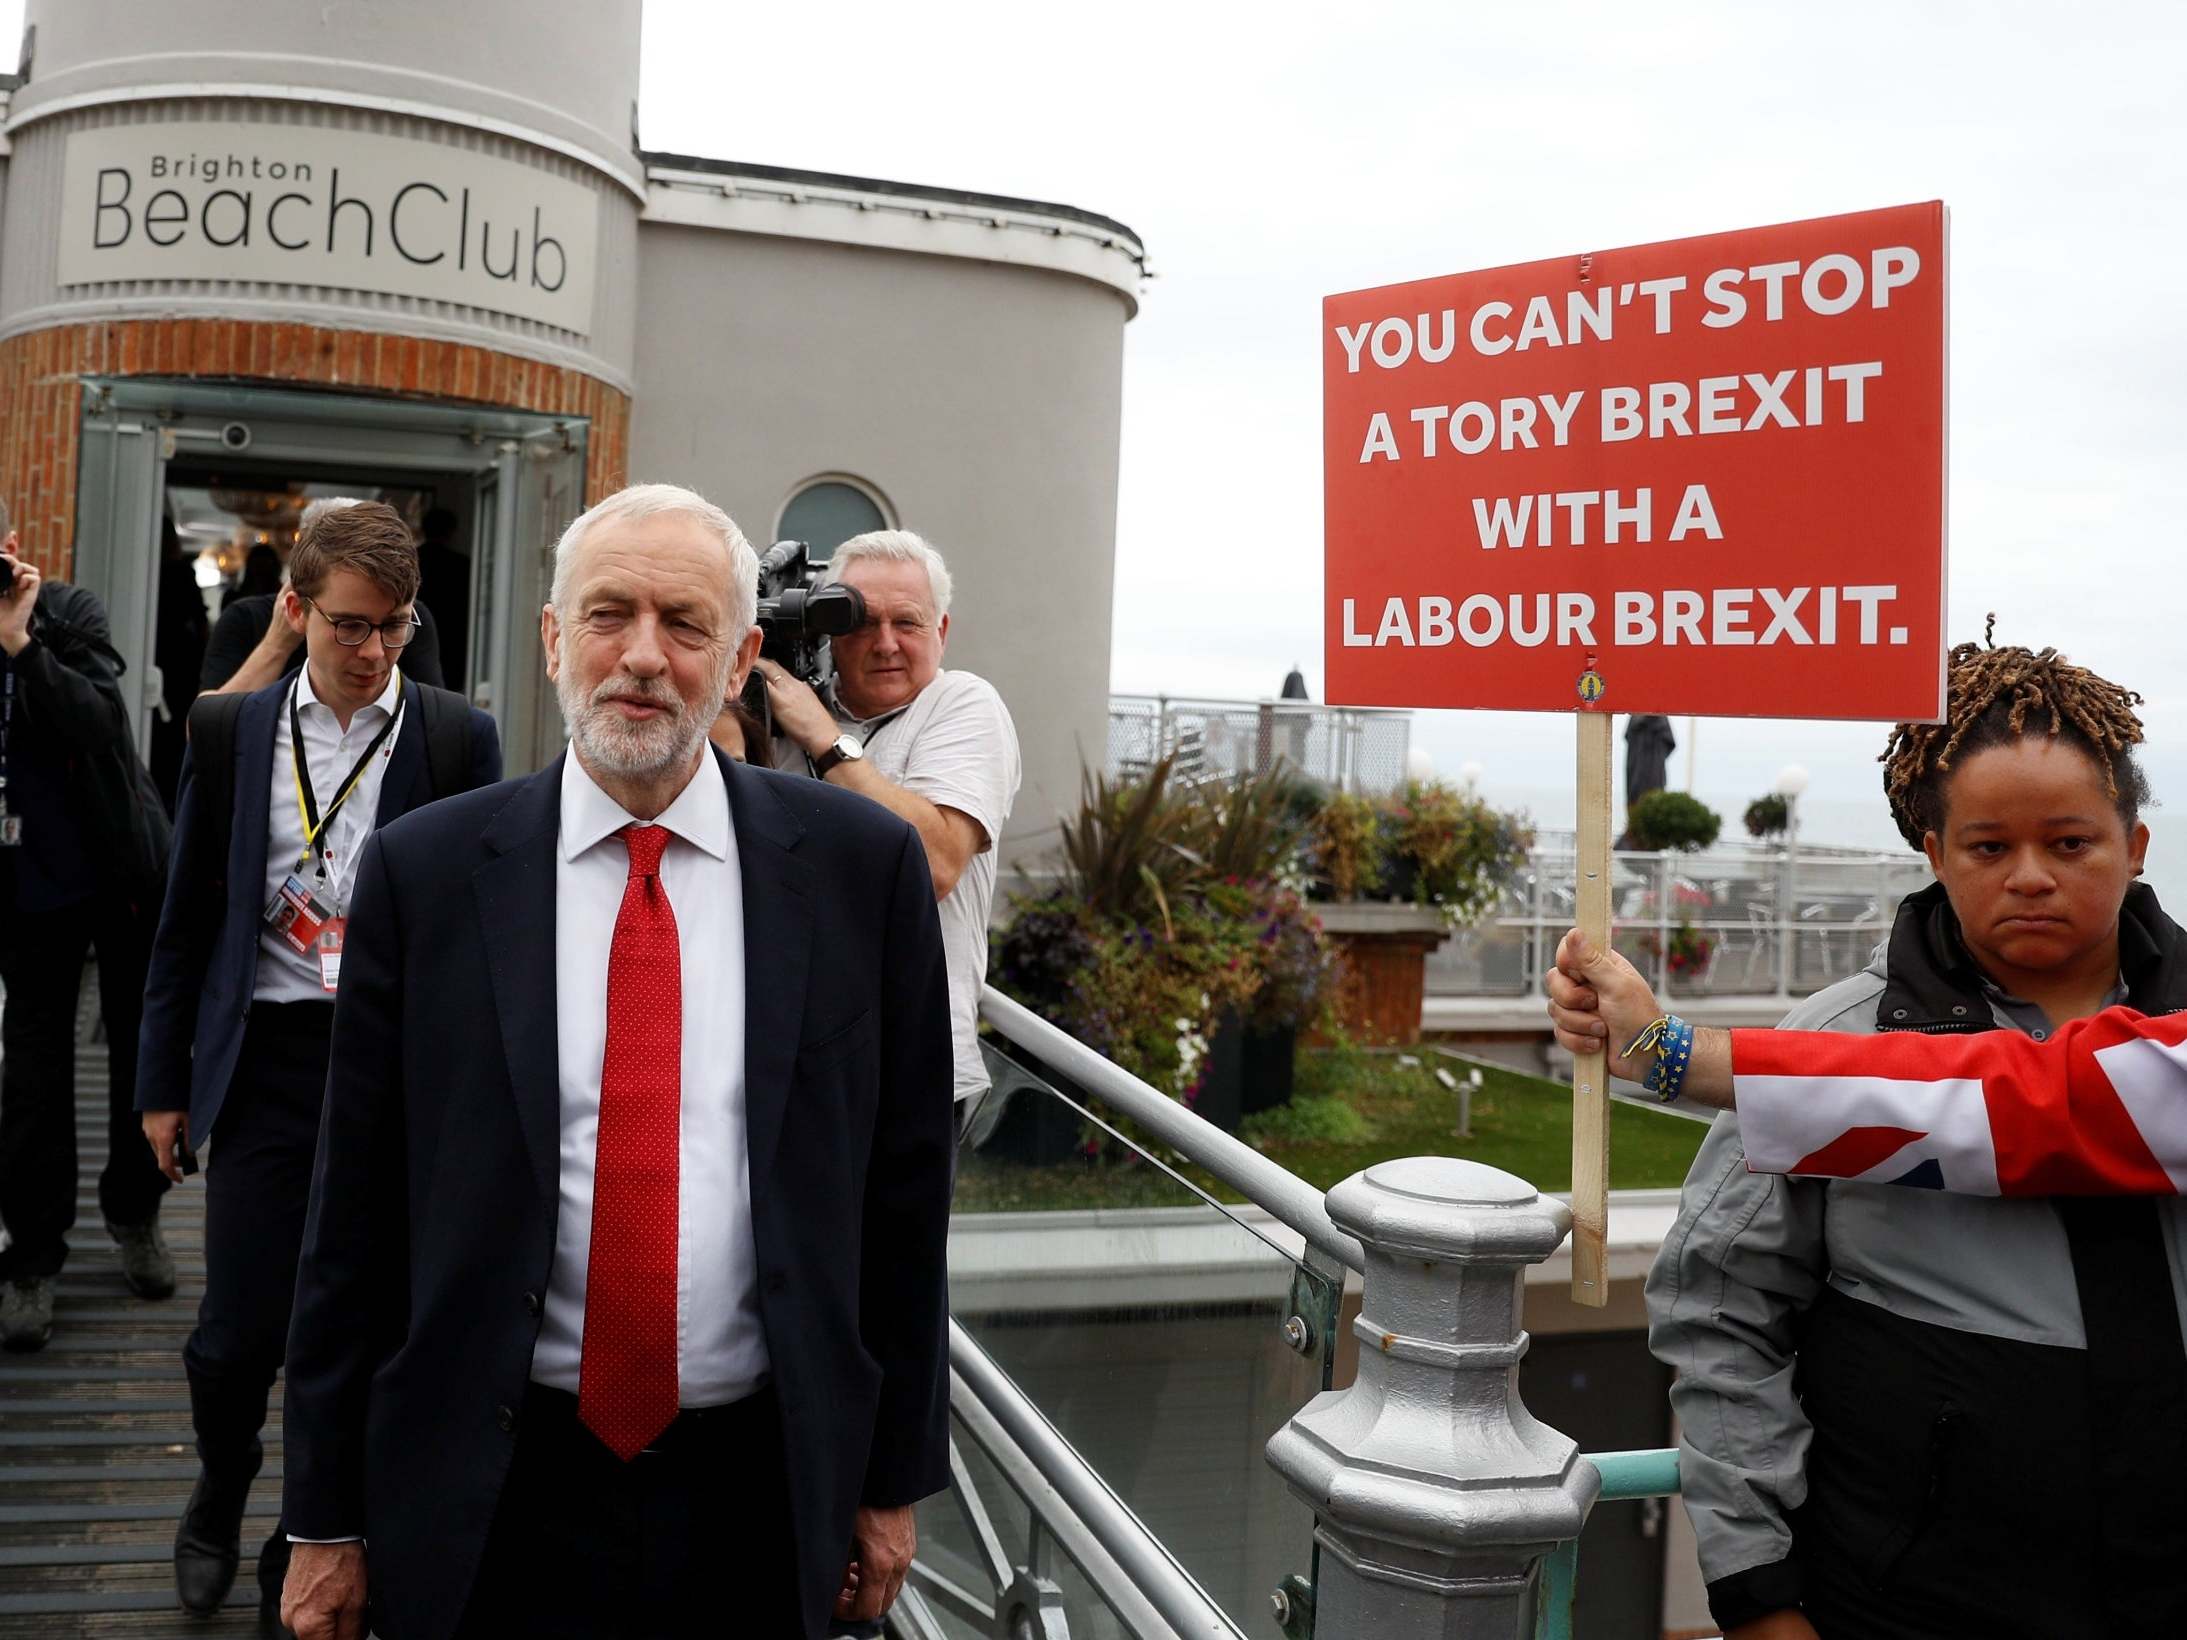 Ignoring the signs: Jeremy Corbyn is a Eurosceptic in a pro-European party